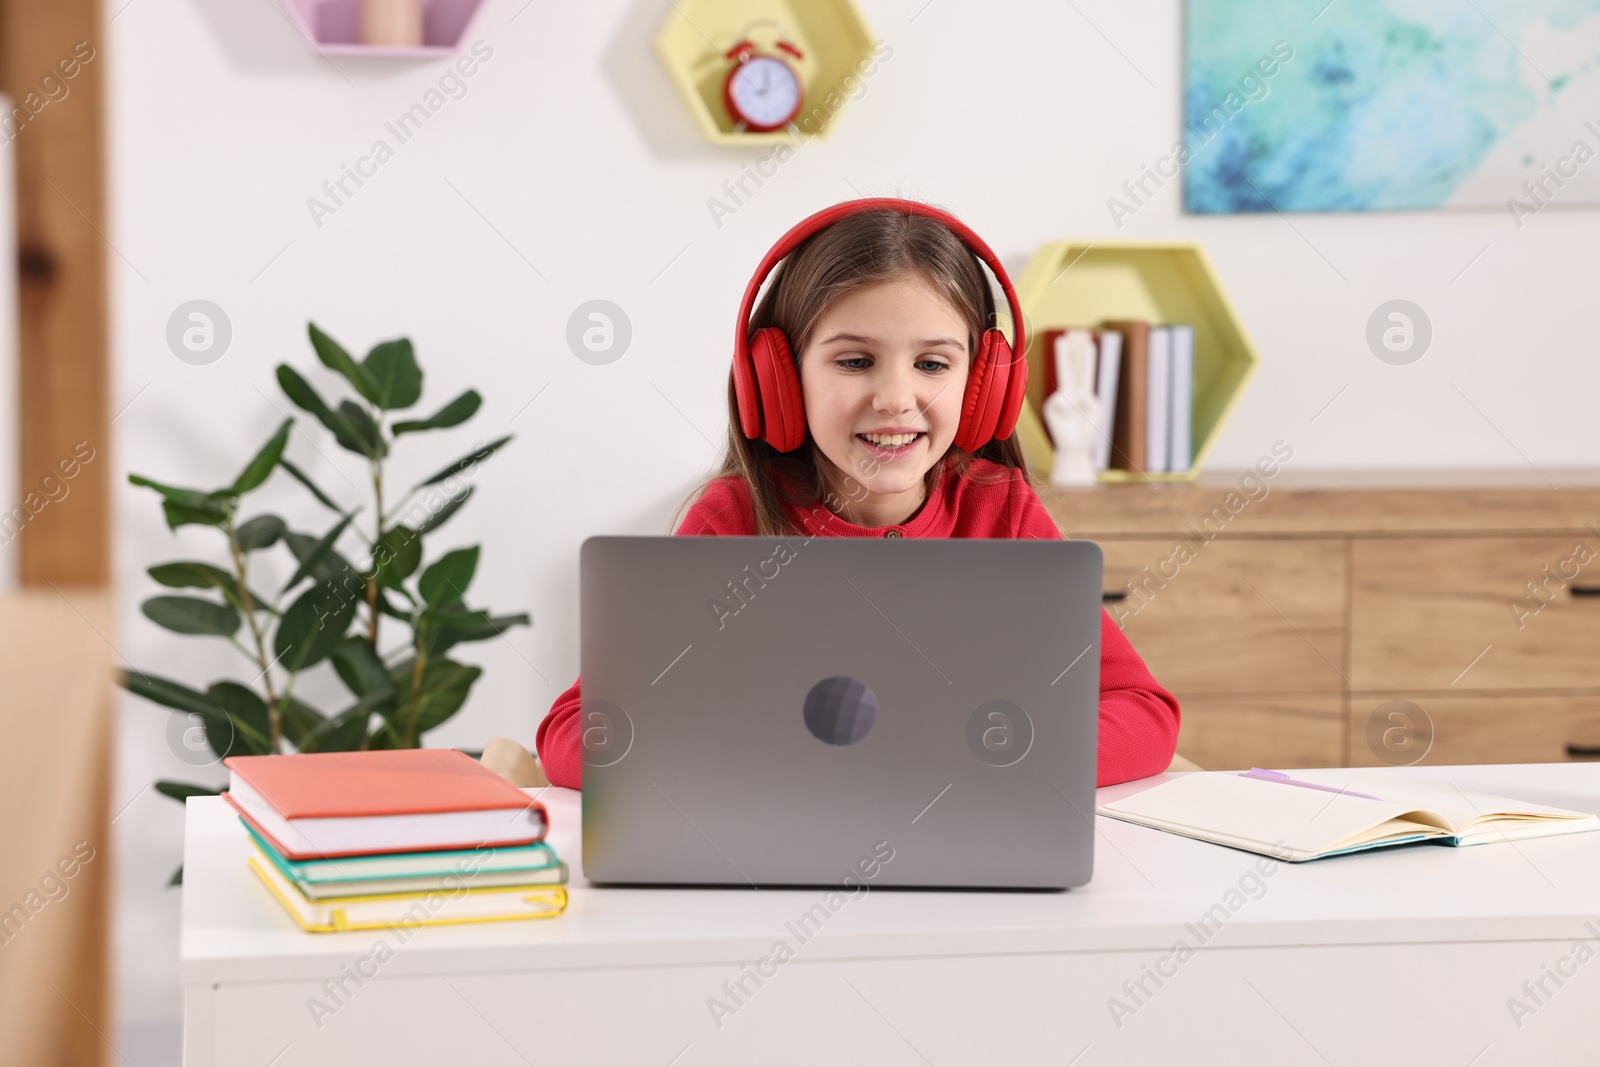 Photo of E-learning. Cute girl using laptop and headphones during online lesson at table indoors